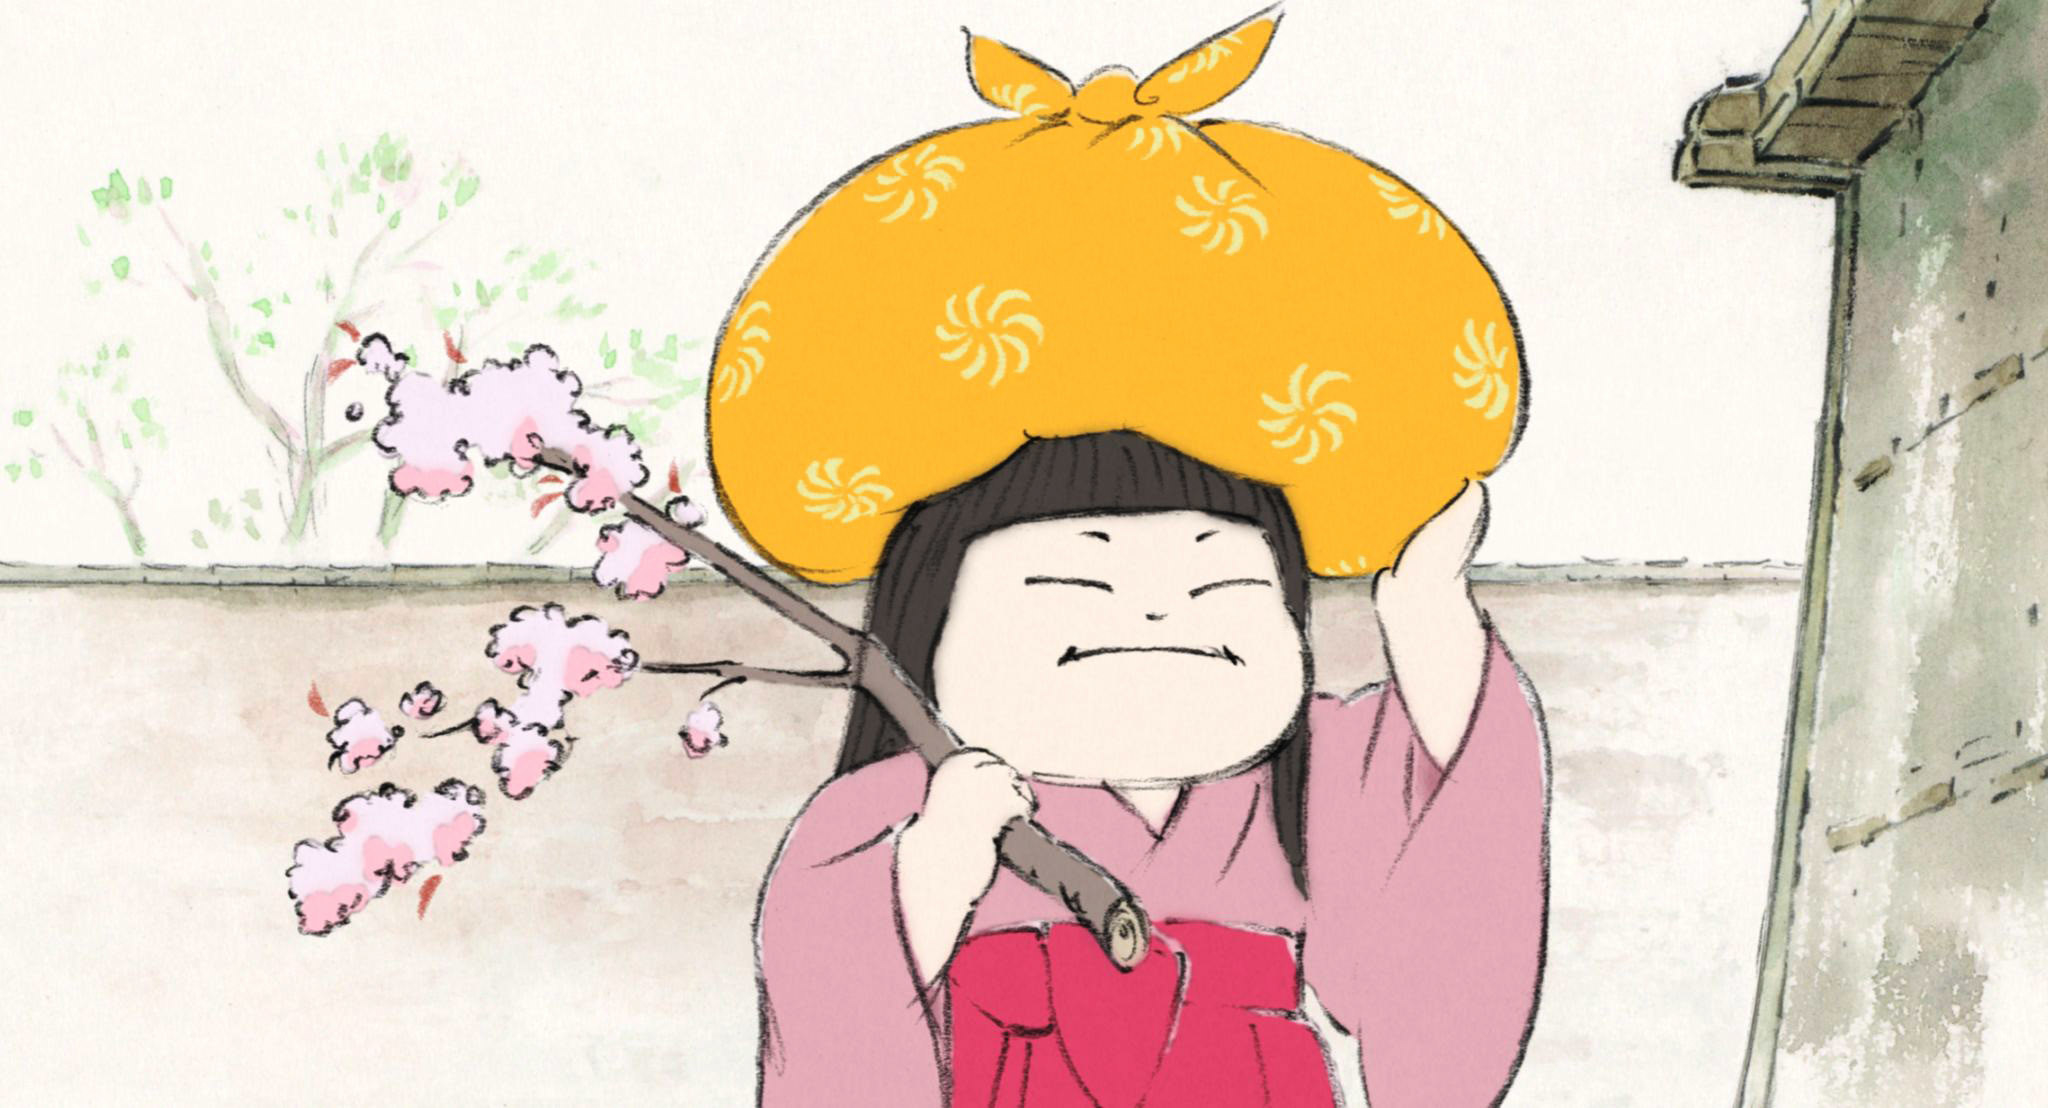 Princess Kaguya uncomfortably holding a yellow bag on her head while also holding a cherry blossom branch in her hand